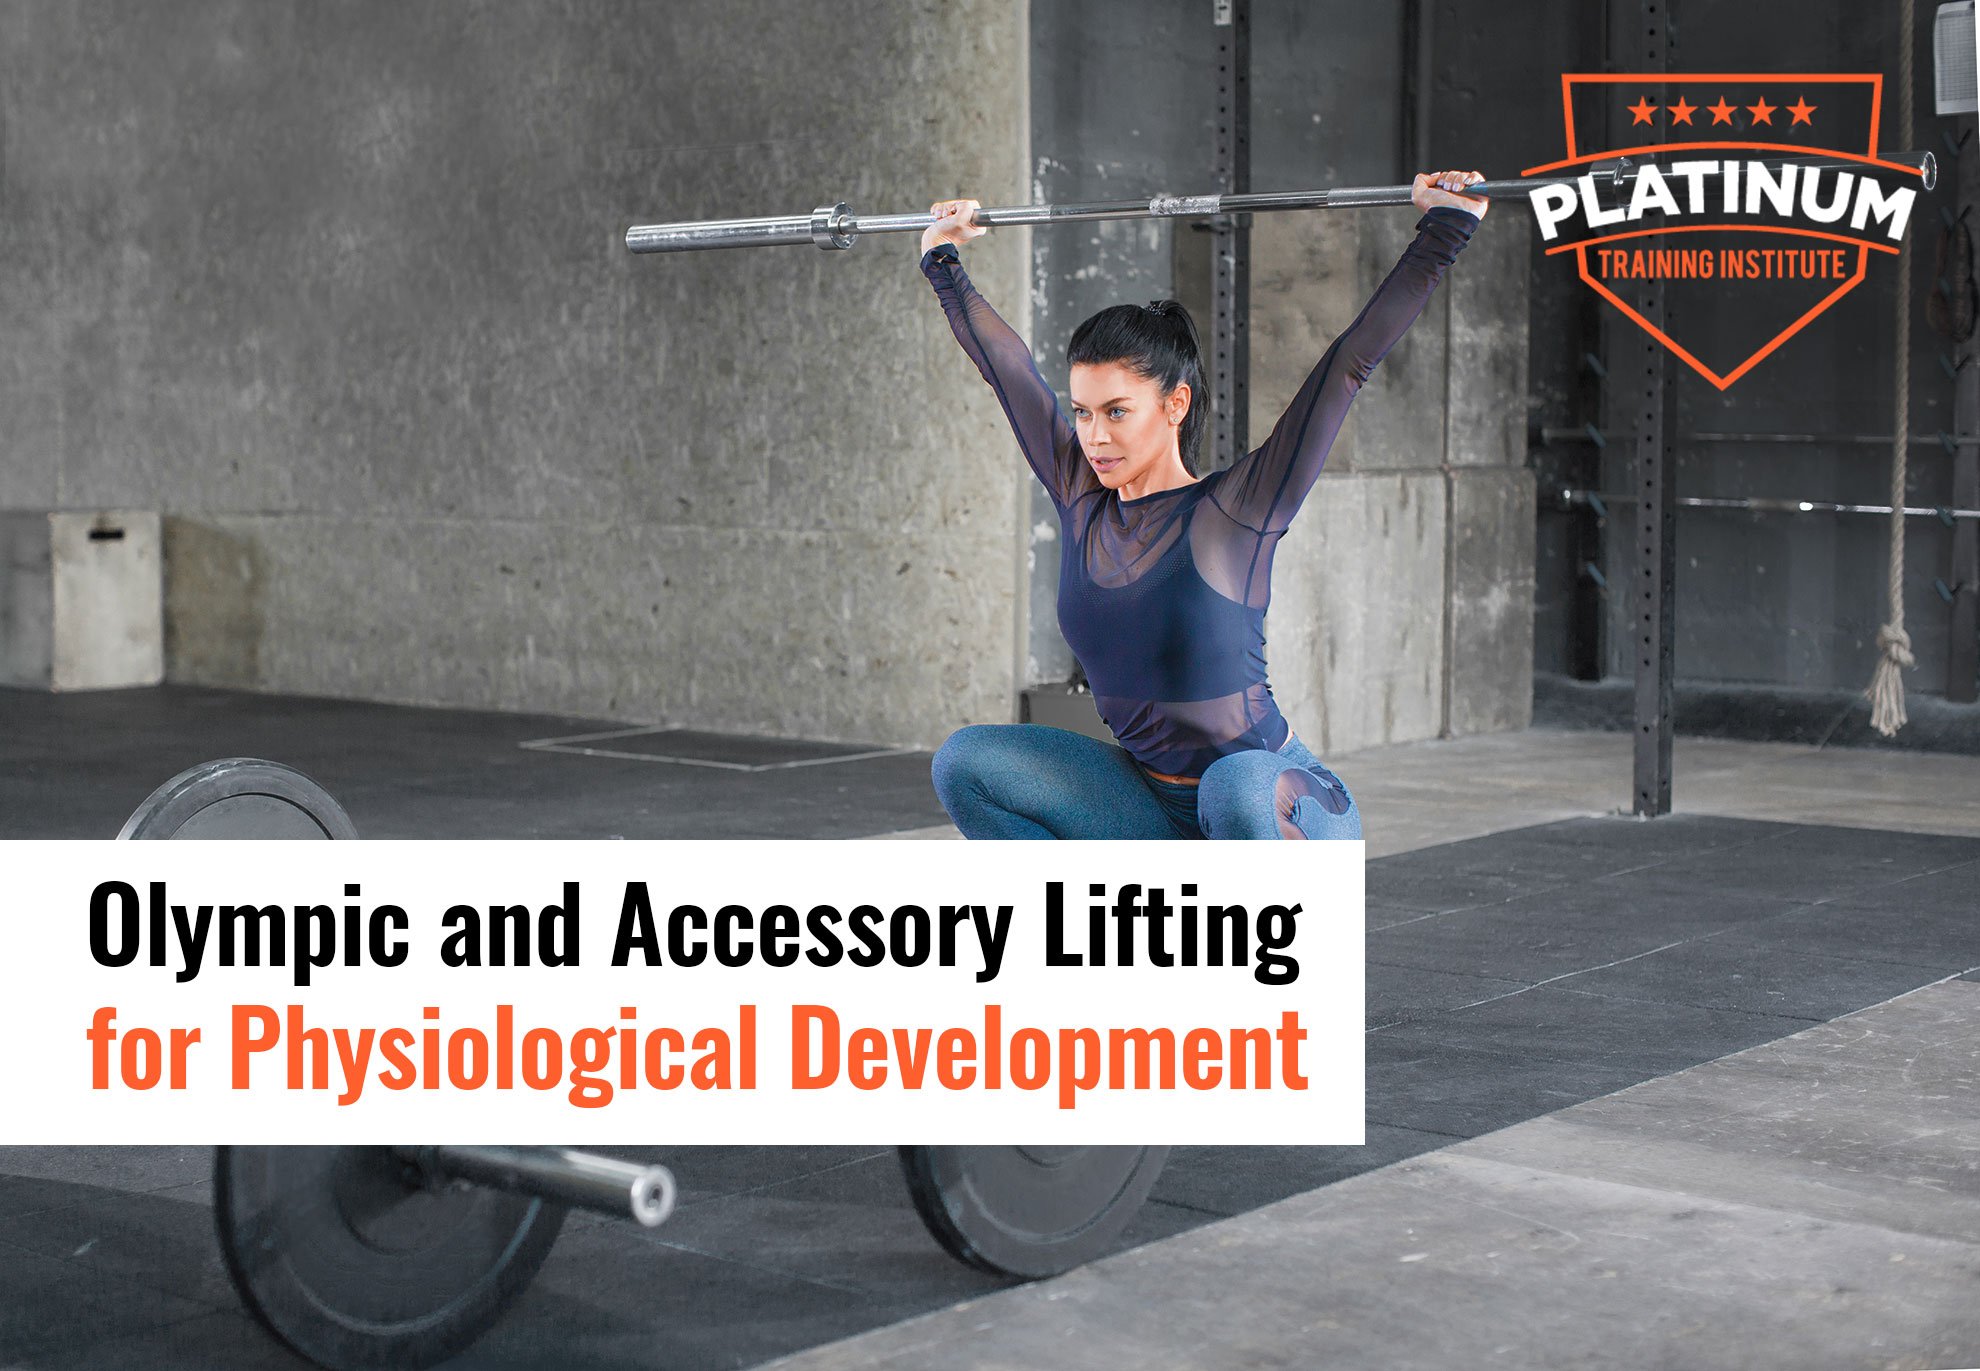 Olympic and Accessory Lifts for Physiological Development Workshop